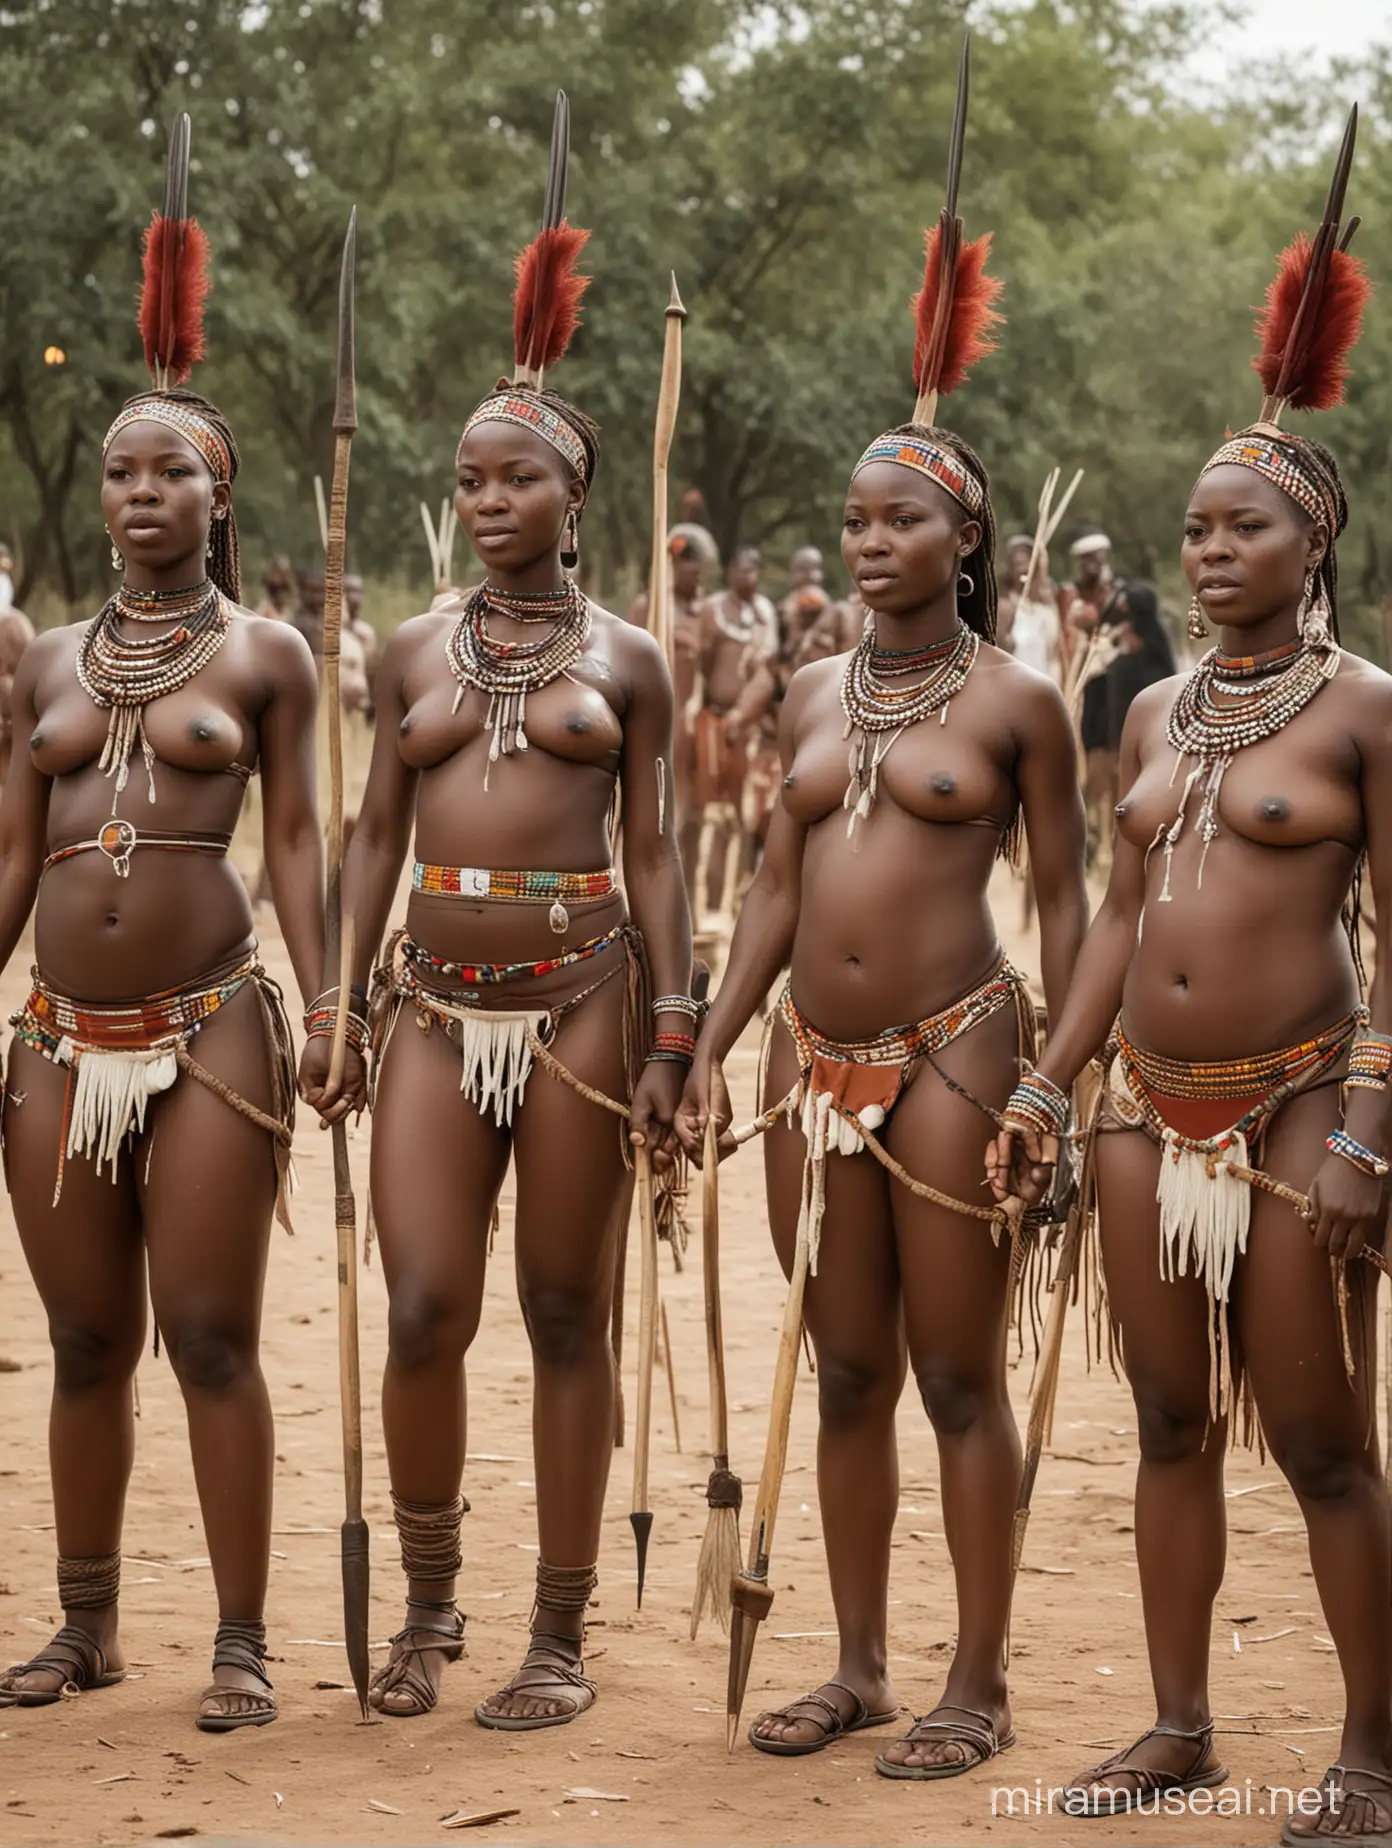 Hot African women with stuffed belly, participating in a tribe ritual, they have spears